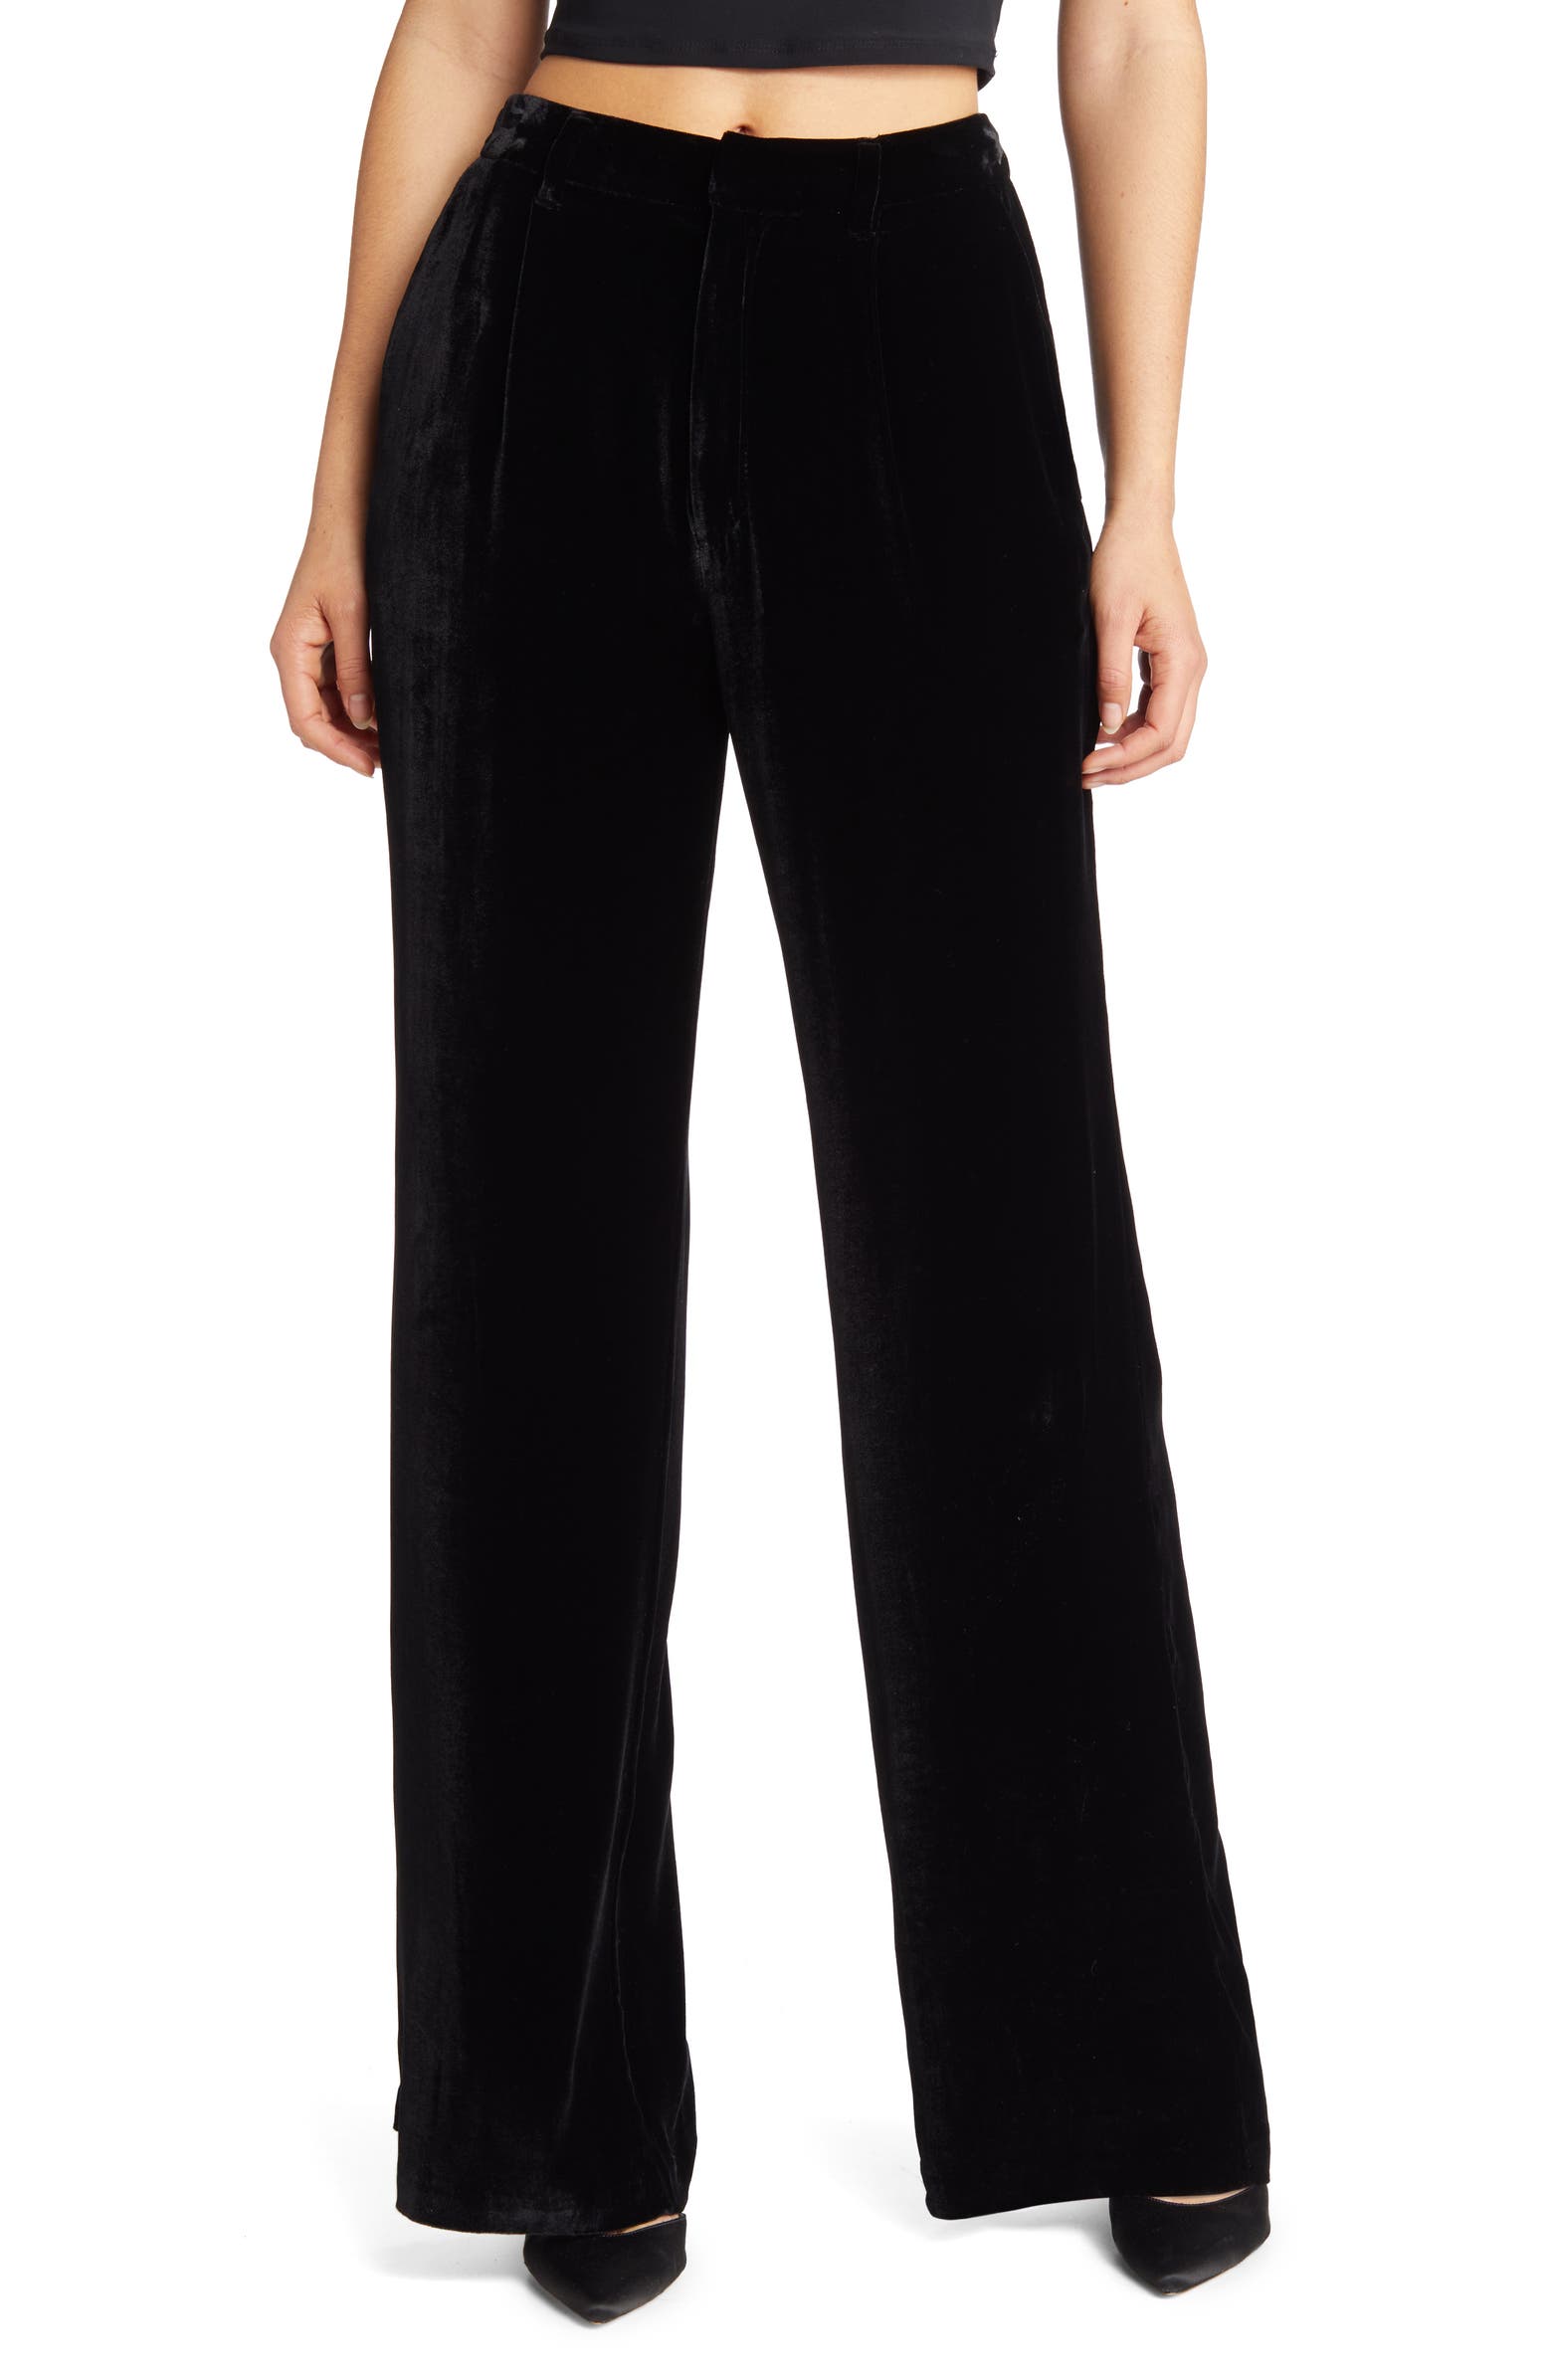 Reformation Wes High Waist Pants | Nordstrom